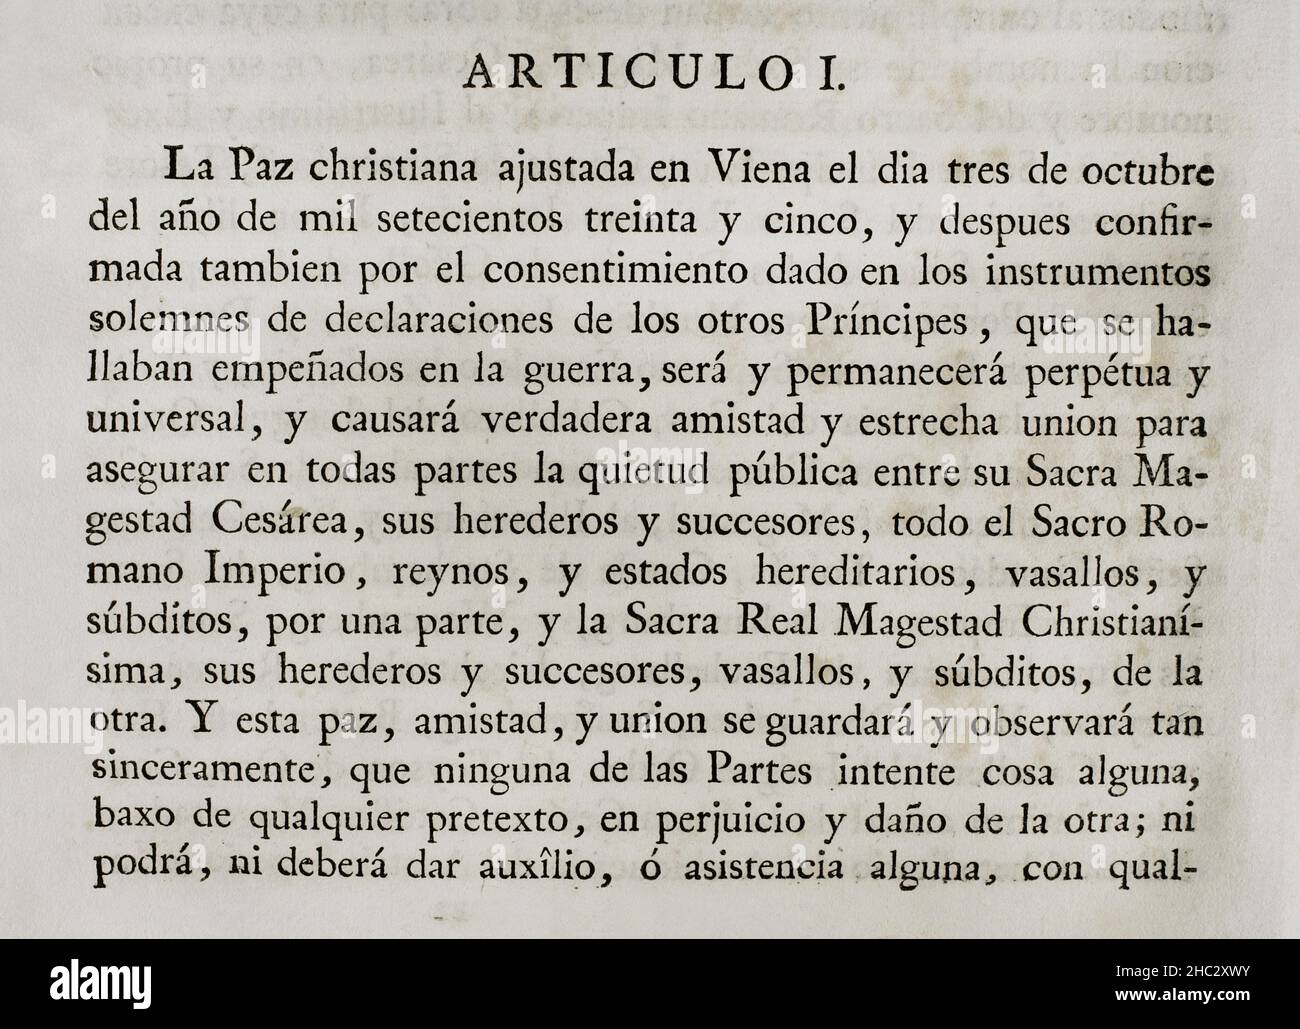 Accession by King Philip V of Spain to the Treaty of Vienna (18 November 1738) between Emperor Charles VI of Germany and Louis XV of France to end the War of the Polish Succession (1733-1735). Spain acceded the following year, signing at Versailles on 21 April 1739. It was ratified by King Philip V at Aranjuez the following 13 May. Article I. Collection of the Treaties of Peace, Alliance, Commerce adjusted by the Crown of Spain with the Foreign Powers (Colección de los Tratados de Paz, Alianza, Comercio ajustados por la Corona de España con las Potencias Extranjeras). Volume II. Madrid, 1800. Stock Photo